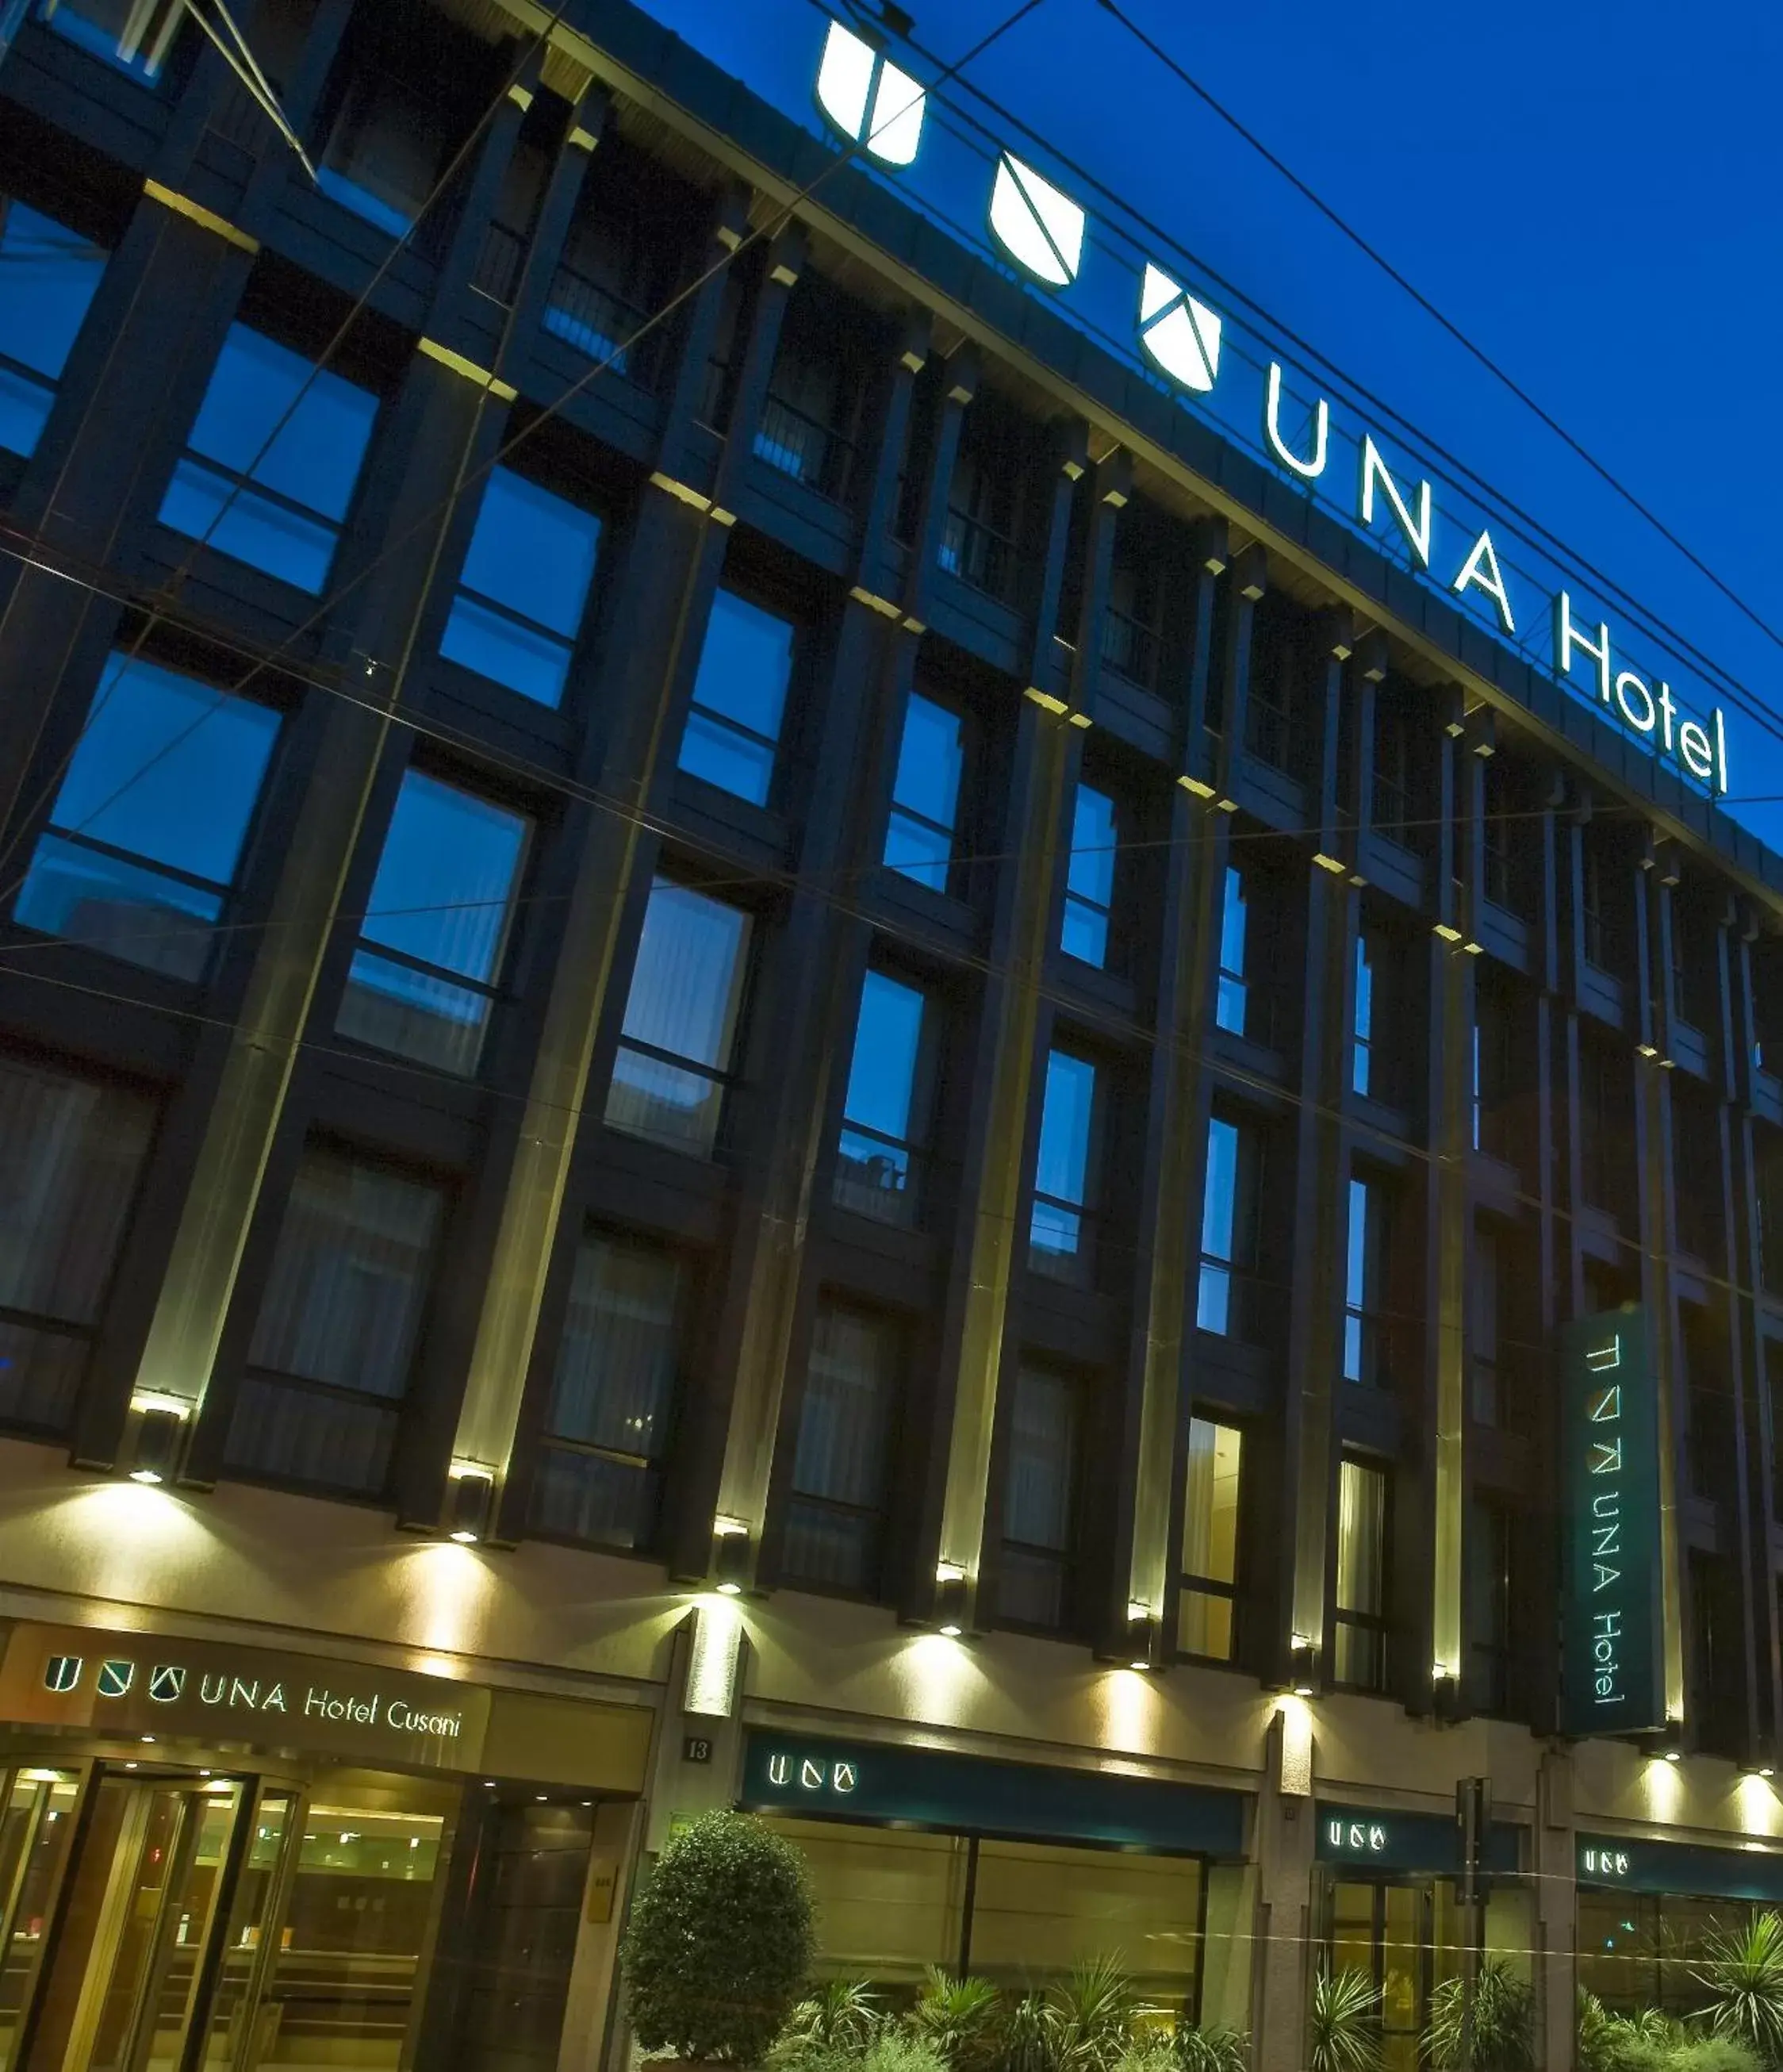 Property Building in UNAHOTELS Cusani Milano